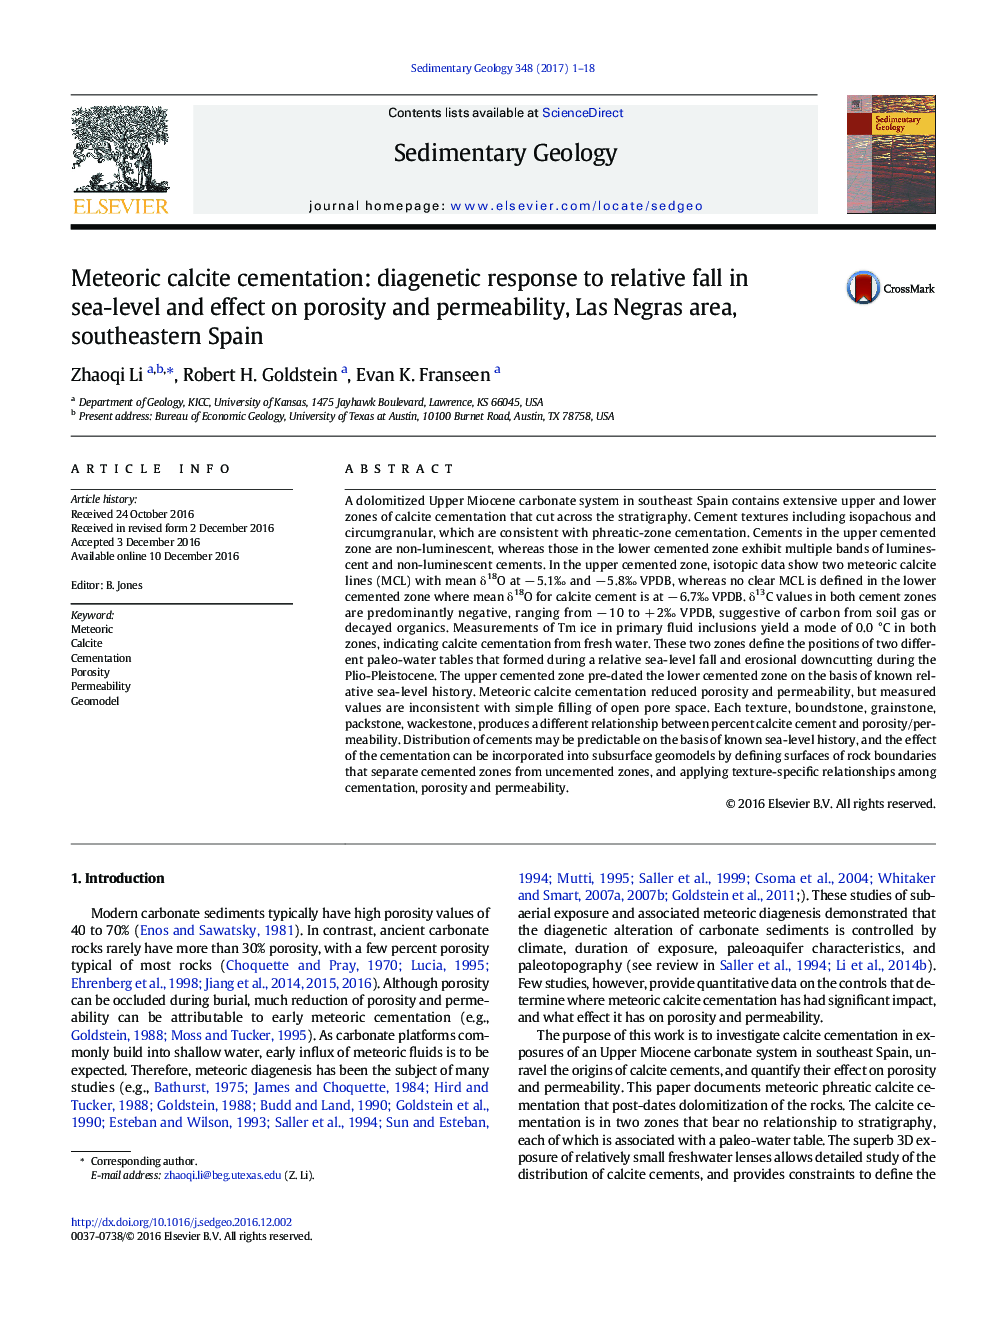 Meteoric calcite cementation: diagenetic response to relative fall in sea-level and effect on porosity and permeability, Las Negras area, southeastern Spain